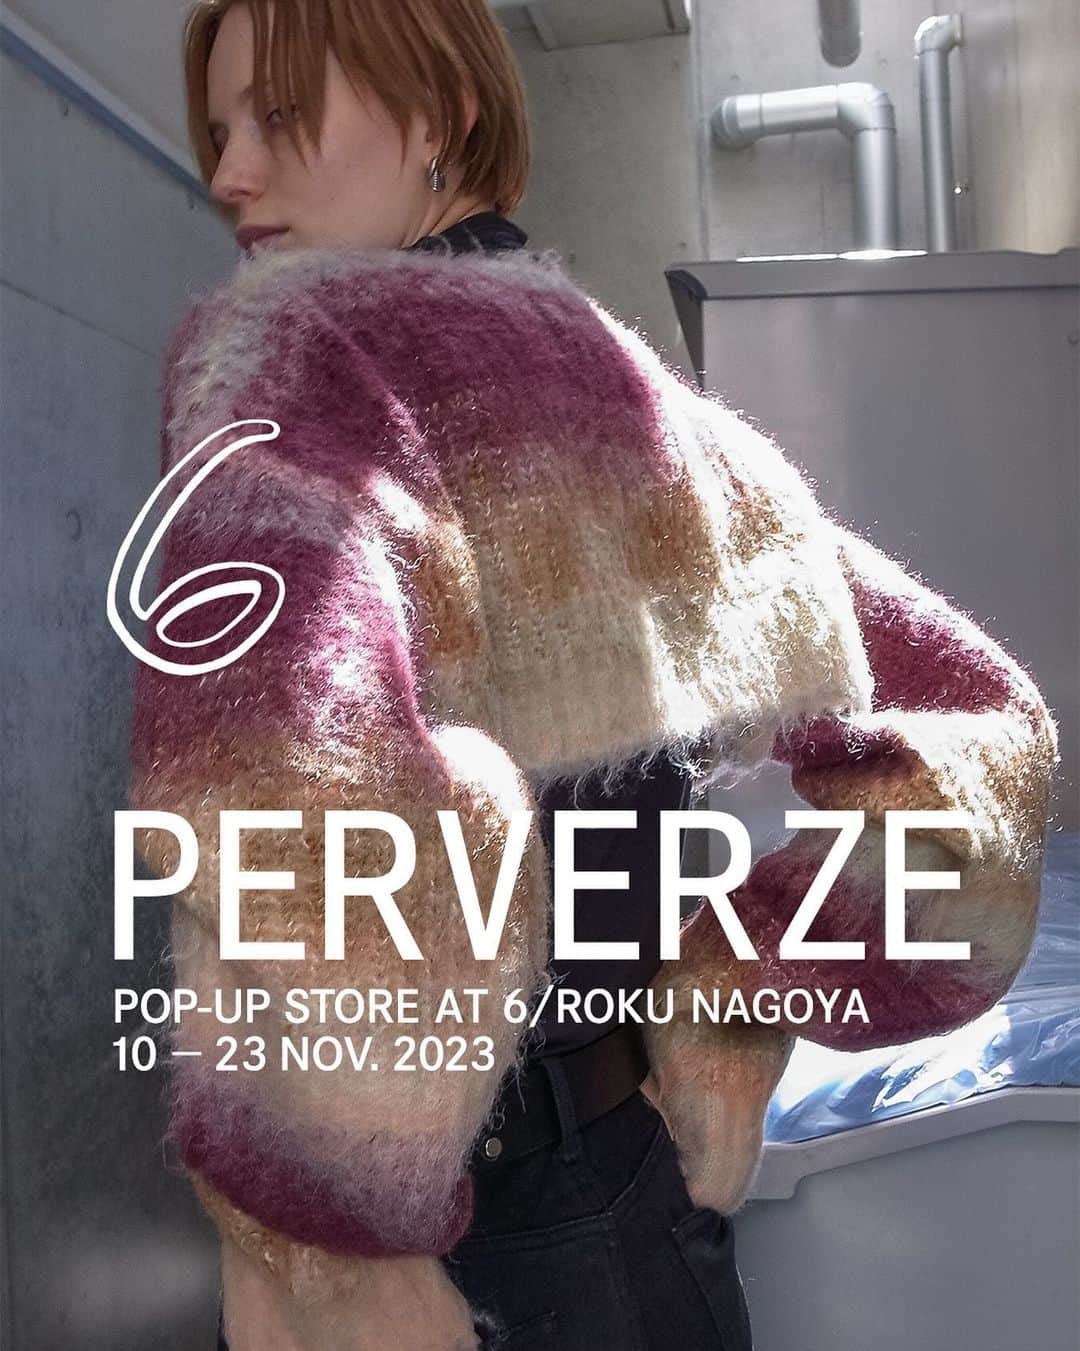 PERVERZE_OFFICIALのインスタグラム：「We are having a pop-up store from 10th November to 23th November at 6 NAGOYA @6______roku . You can see and try our AW23 collection. We're looking forward to seeing you.  11/10(金)から11/23(木)までの期間限定で、6 名古屋店にてポップアップストアを開催いたします。 AW23の最新秋冬コレクションアイテムをお試しいただけます。 是非ご覧ください。  【STORE INFORMATION】 6 NAGOYA ADRESS: 〒460-0008 愛知県名古屋市中区栄3-6-1 ラシック 2F TEL: 052-249-3766 TIME: 11:00～21:00  #PERVERZE #AW23」